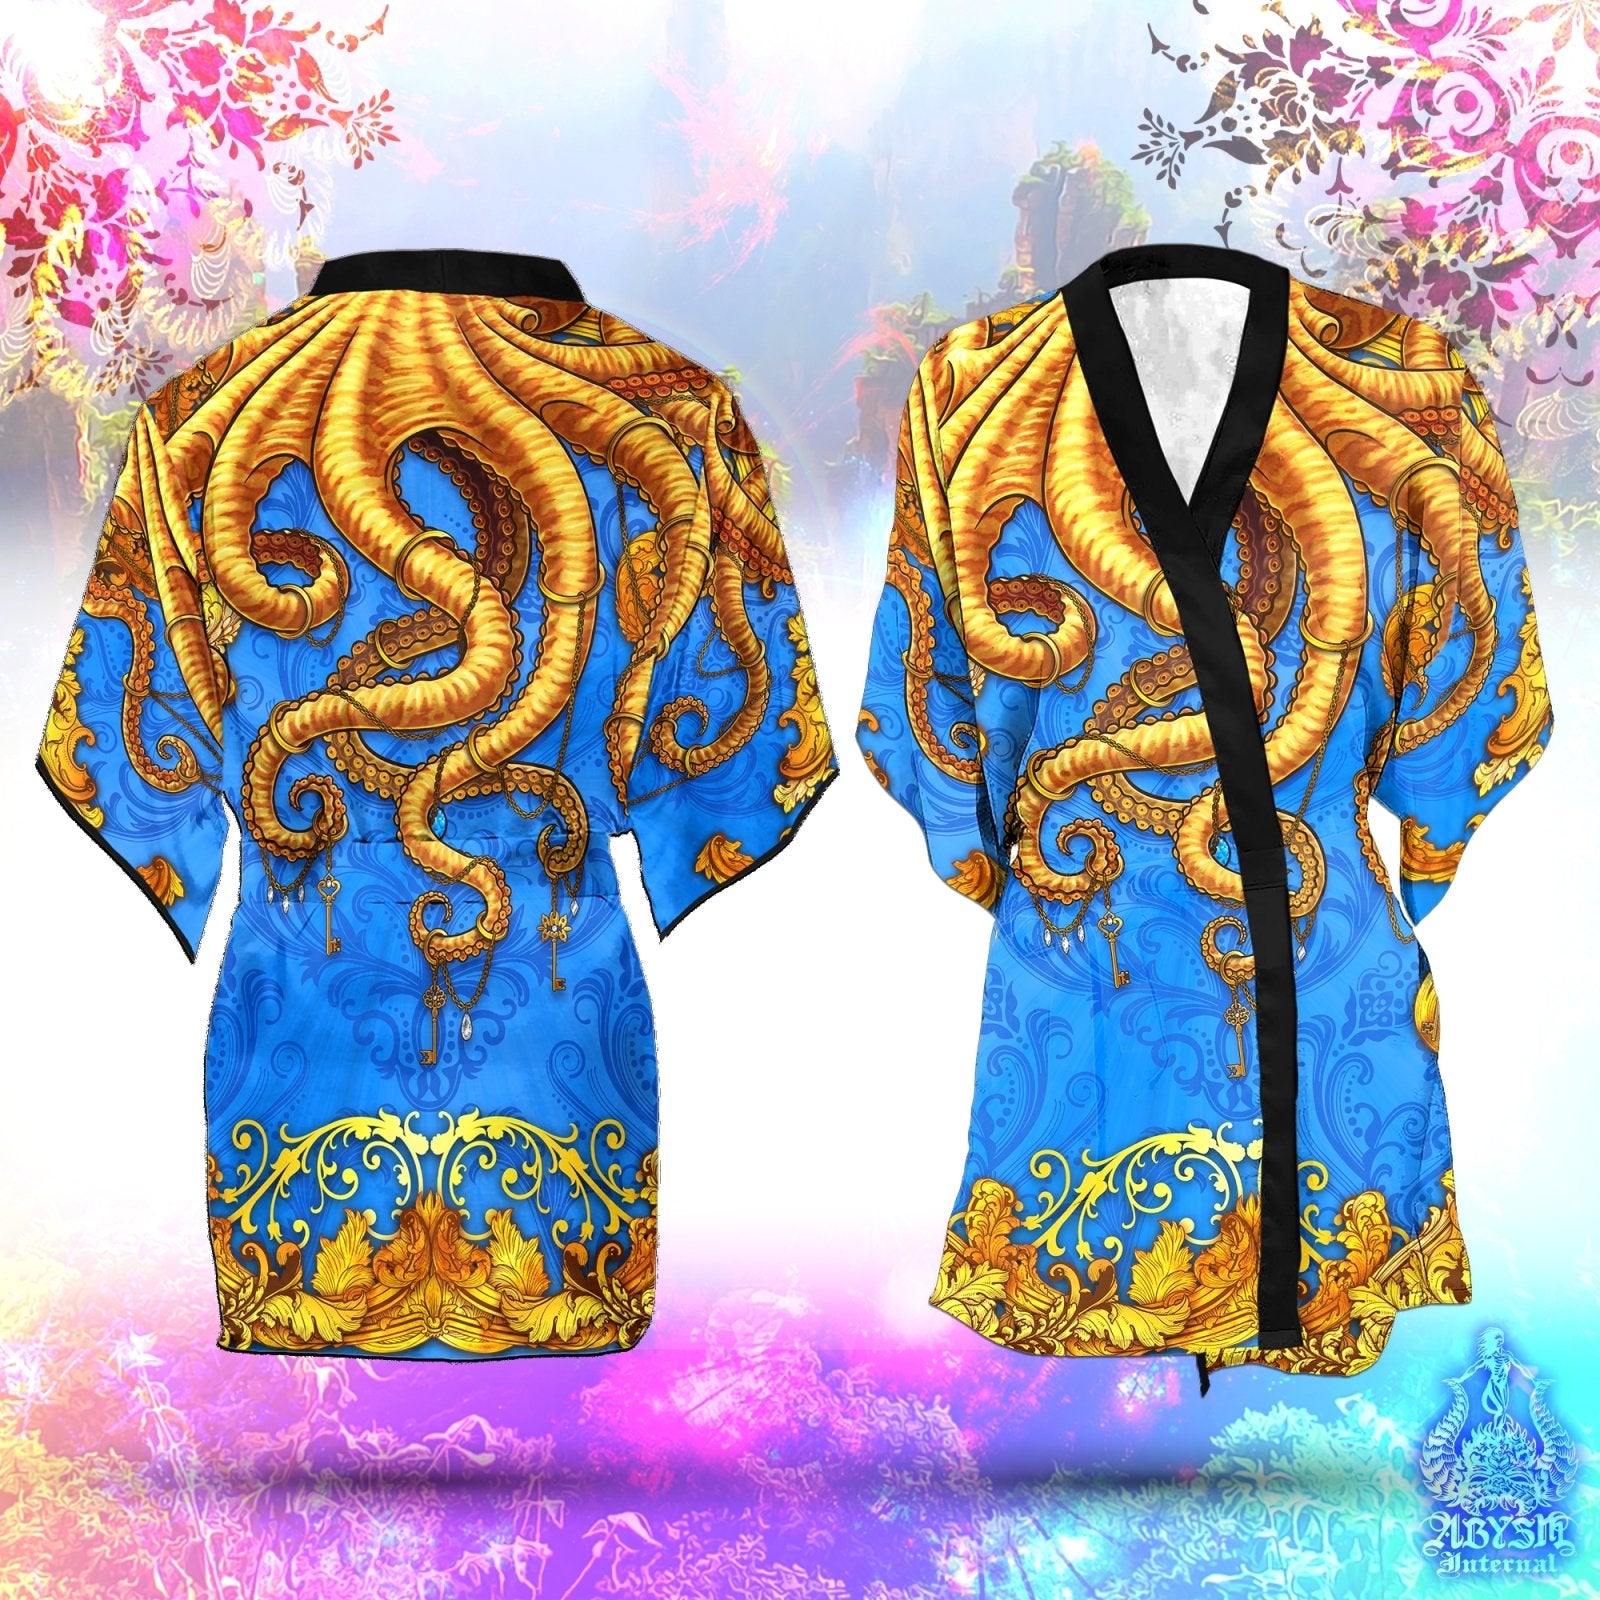 Beach Cover Up, Beach Outfit, Octopus Party Kimono, Summer Festival Robe, Indie and Alternative Clothing, Unisex - Cyan Gold - Abysm Internal